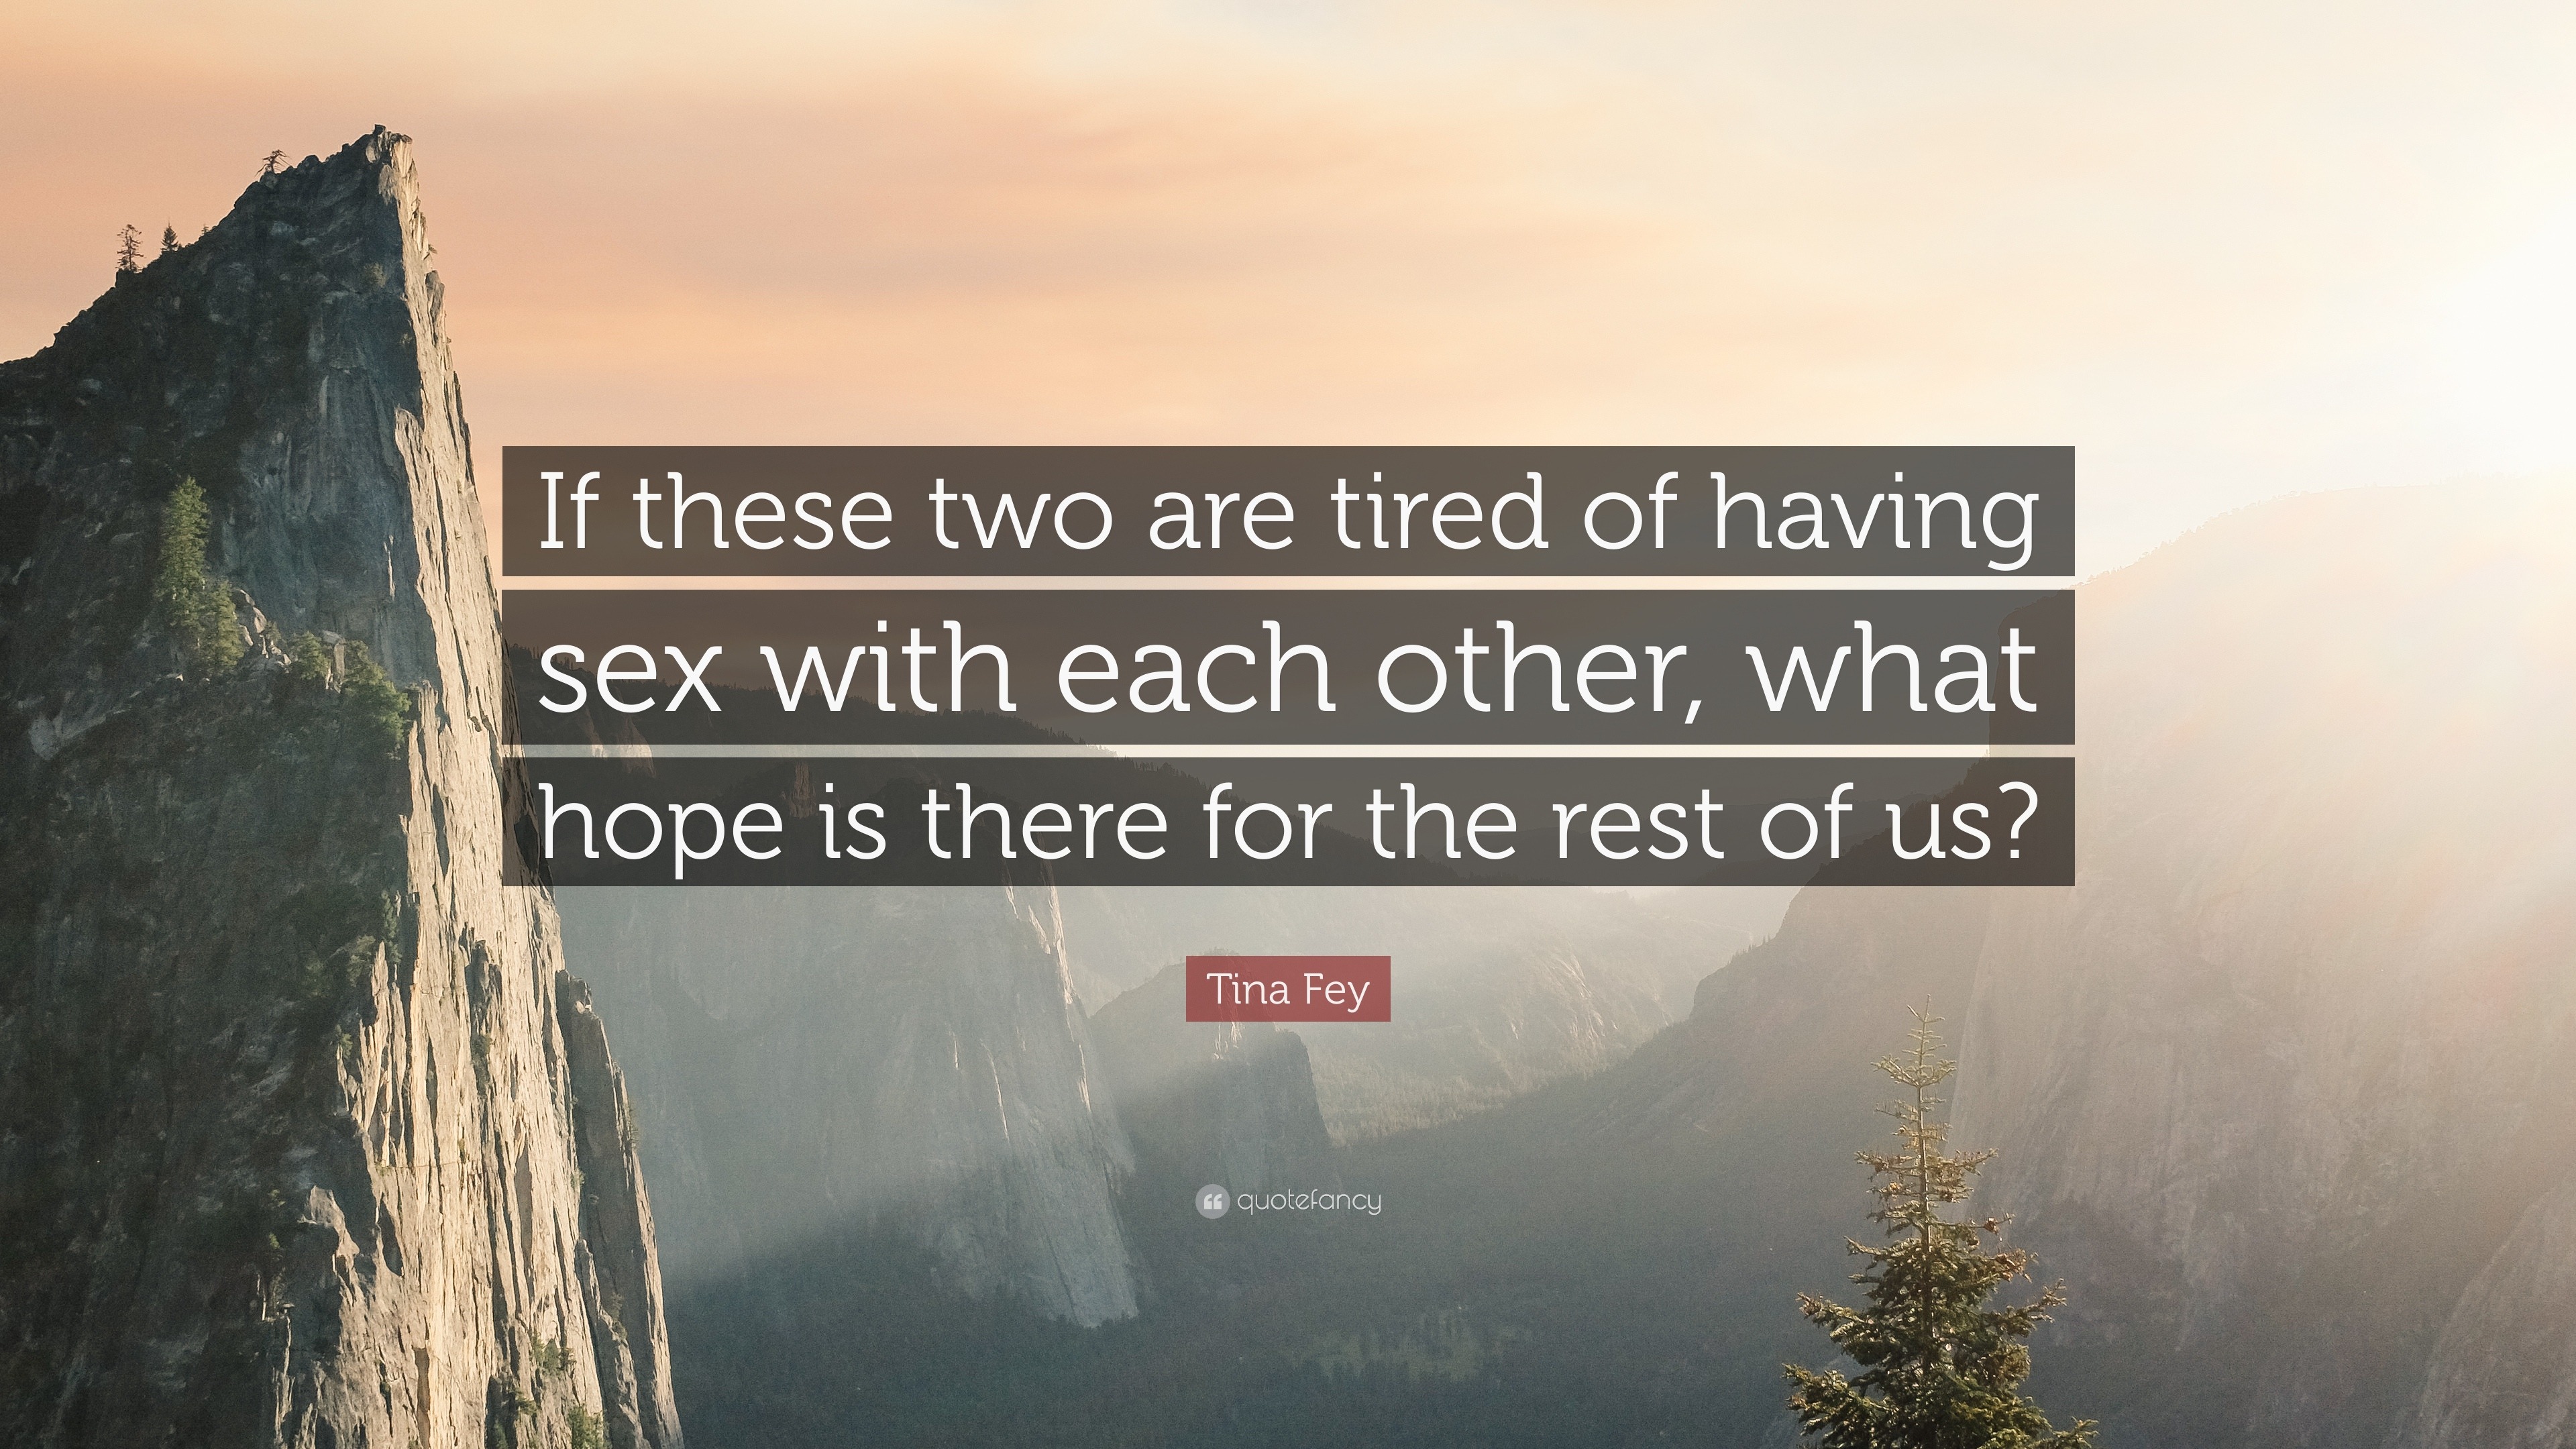 Tina Fey Quote “if These Two Are Tired Of Having Sex With Each Other